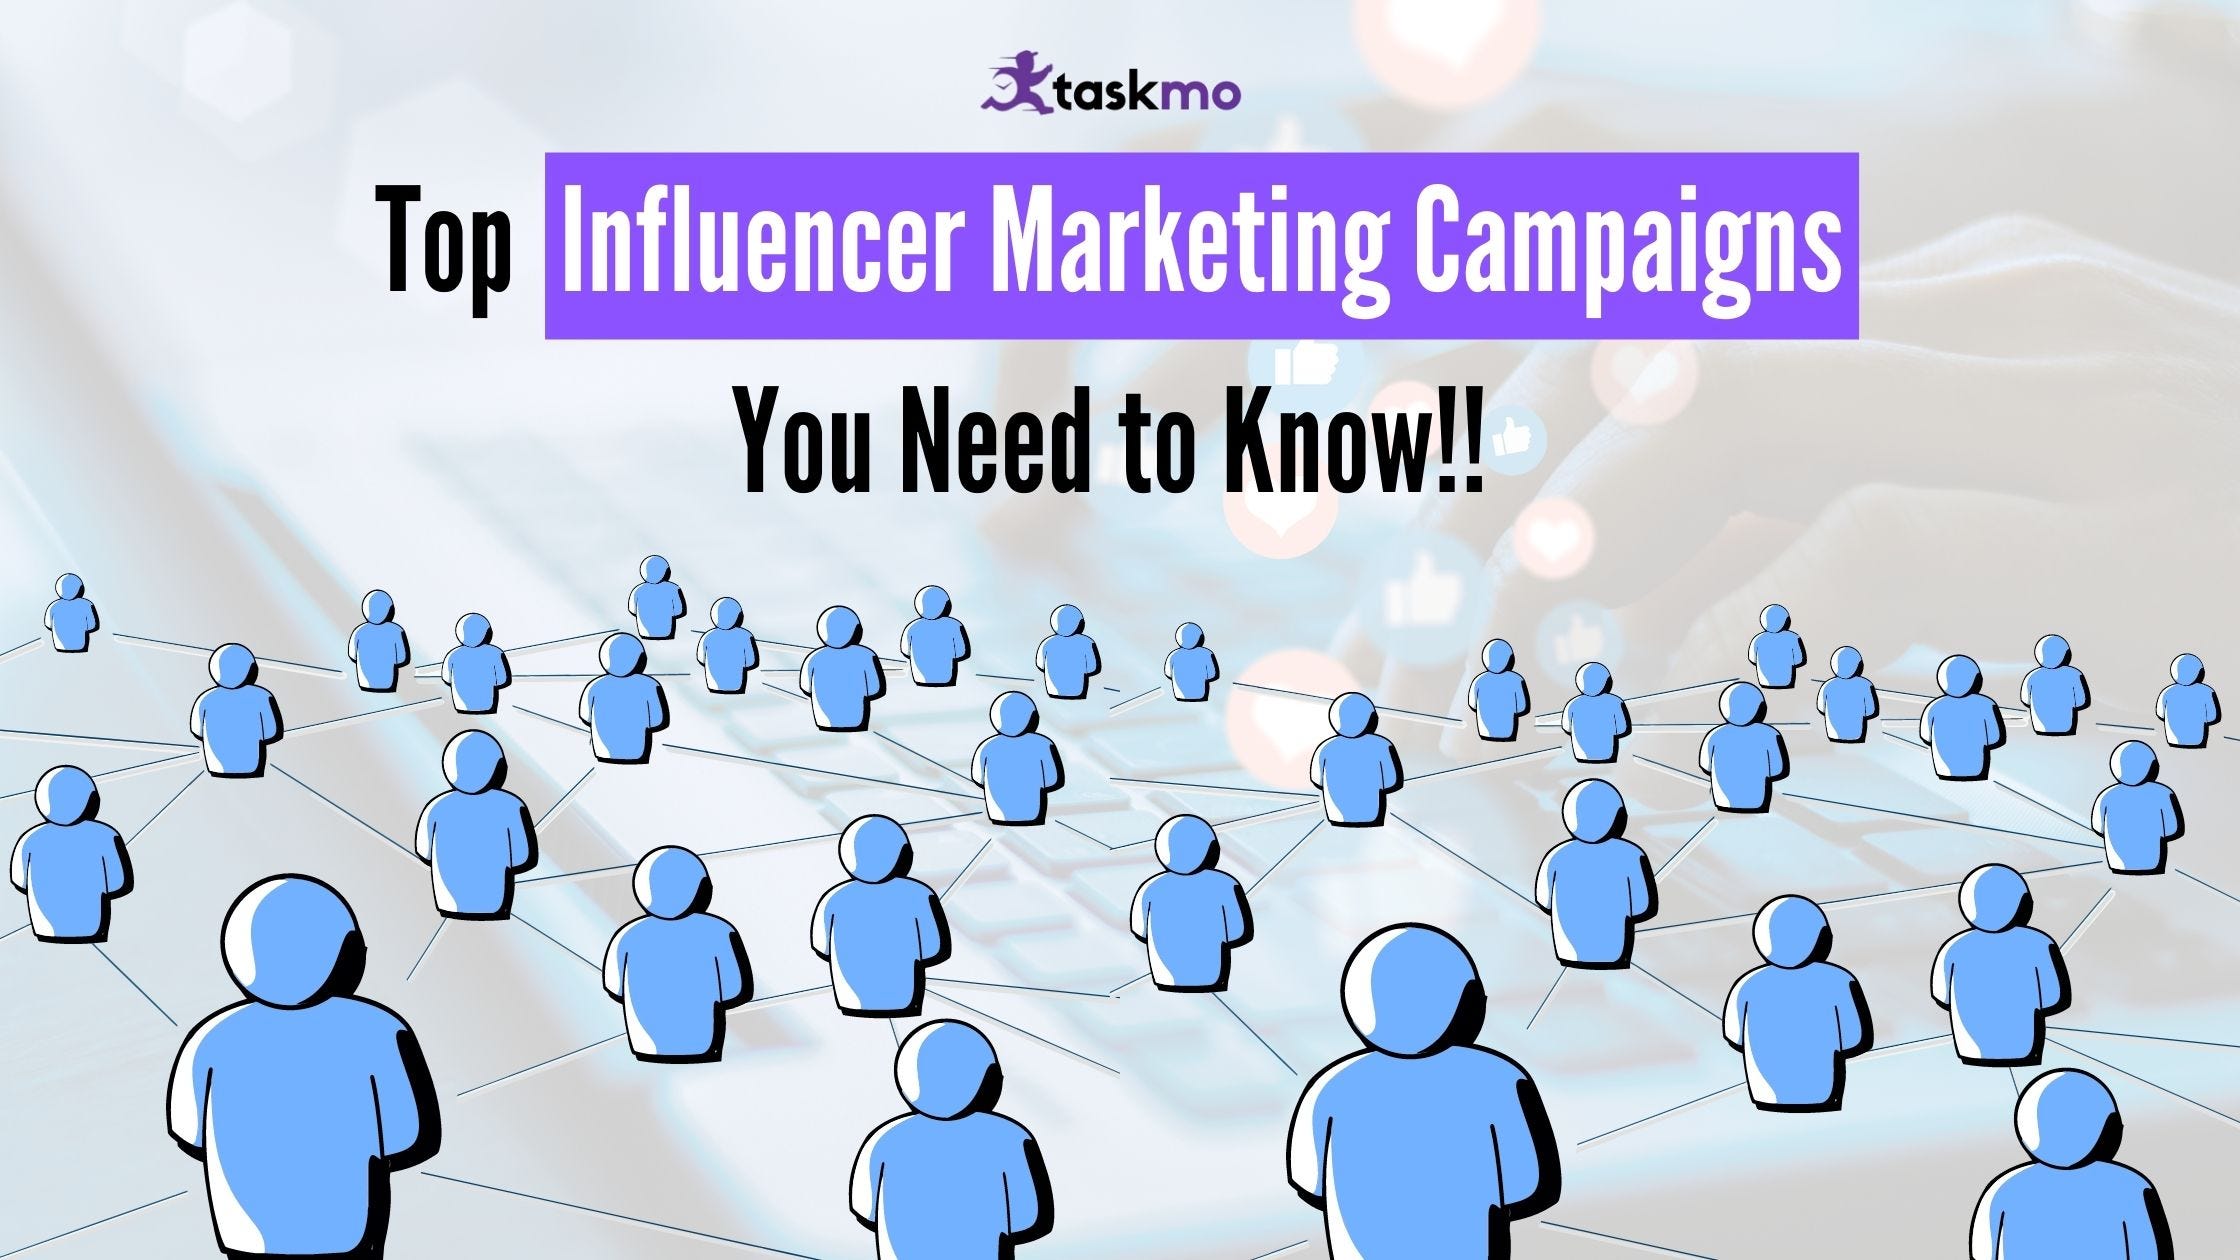 Top Influencer Marketing Campaigns You Need to Know